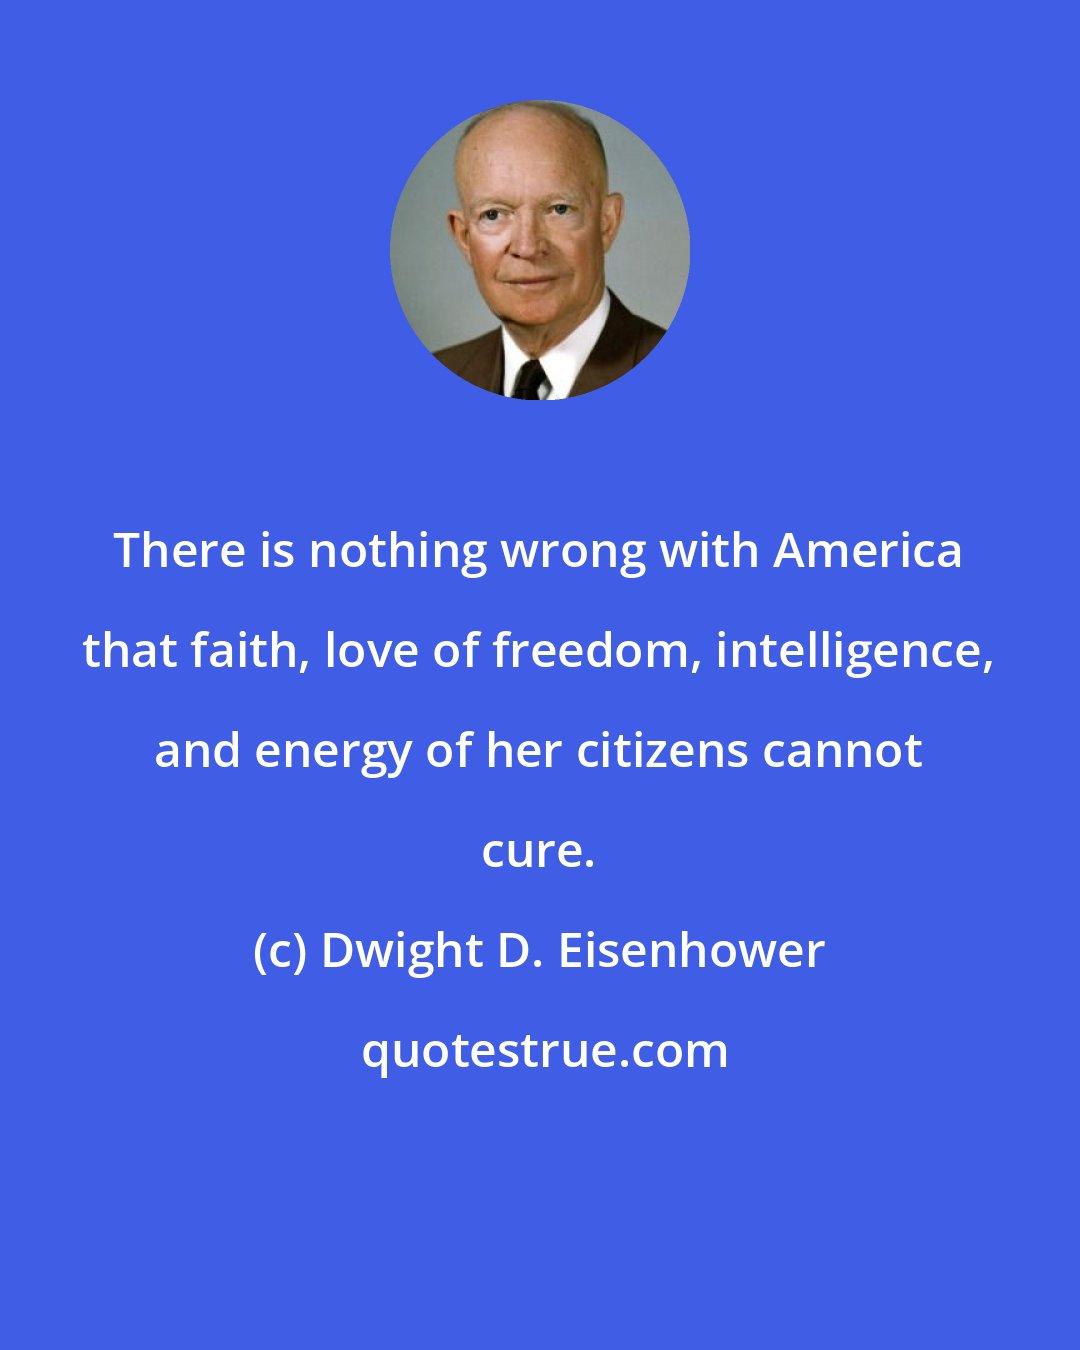 Dwight D. Eisenhower: There is nothing wrong with America that faith, love of freedom, intelligence, and energy of her citizens cannot cure.